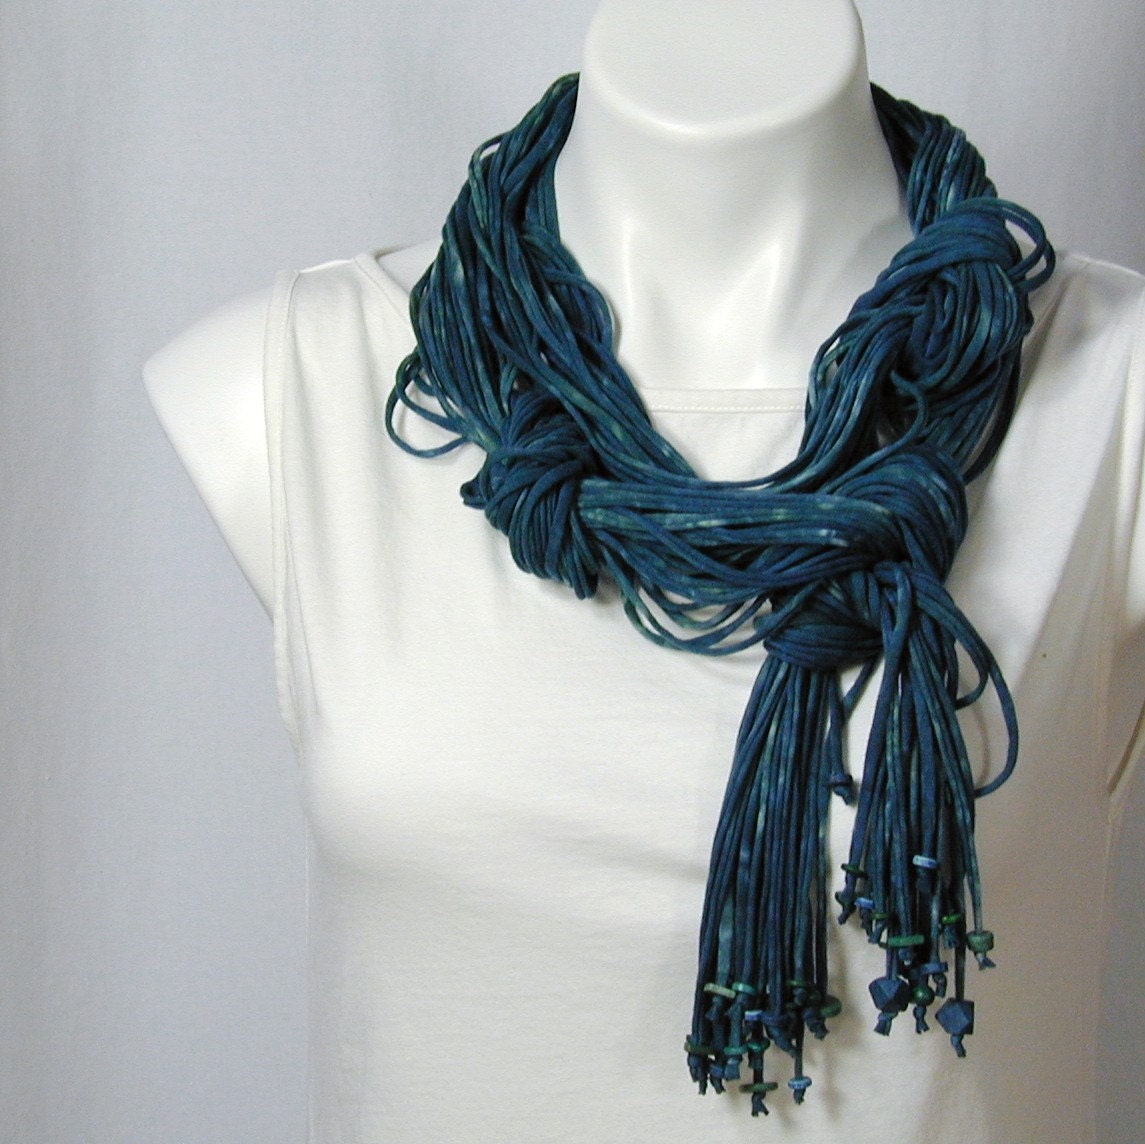 The Beaded Soba Scarf in Cobalt, Jade, and Straw